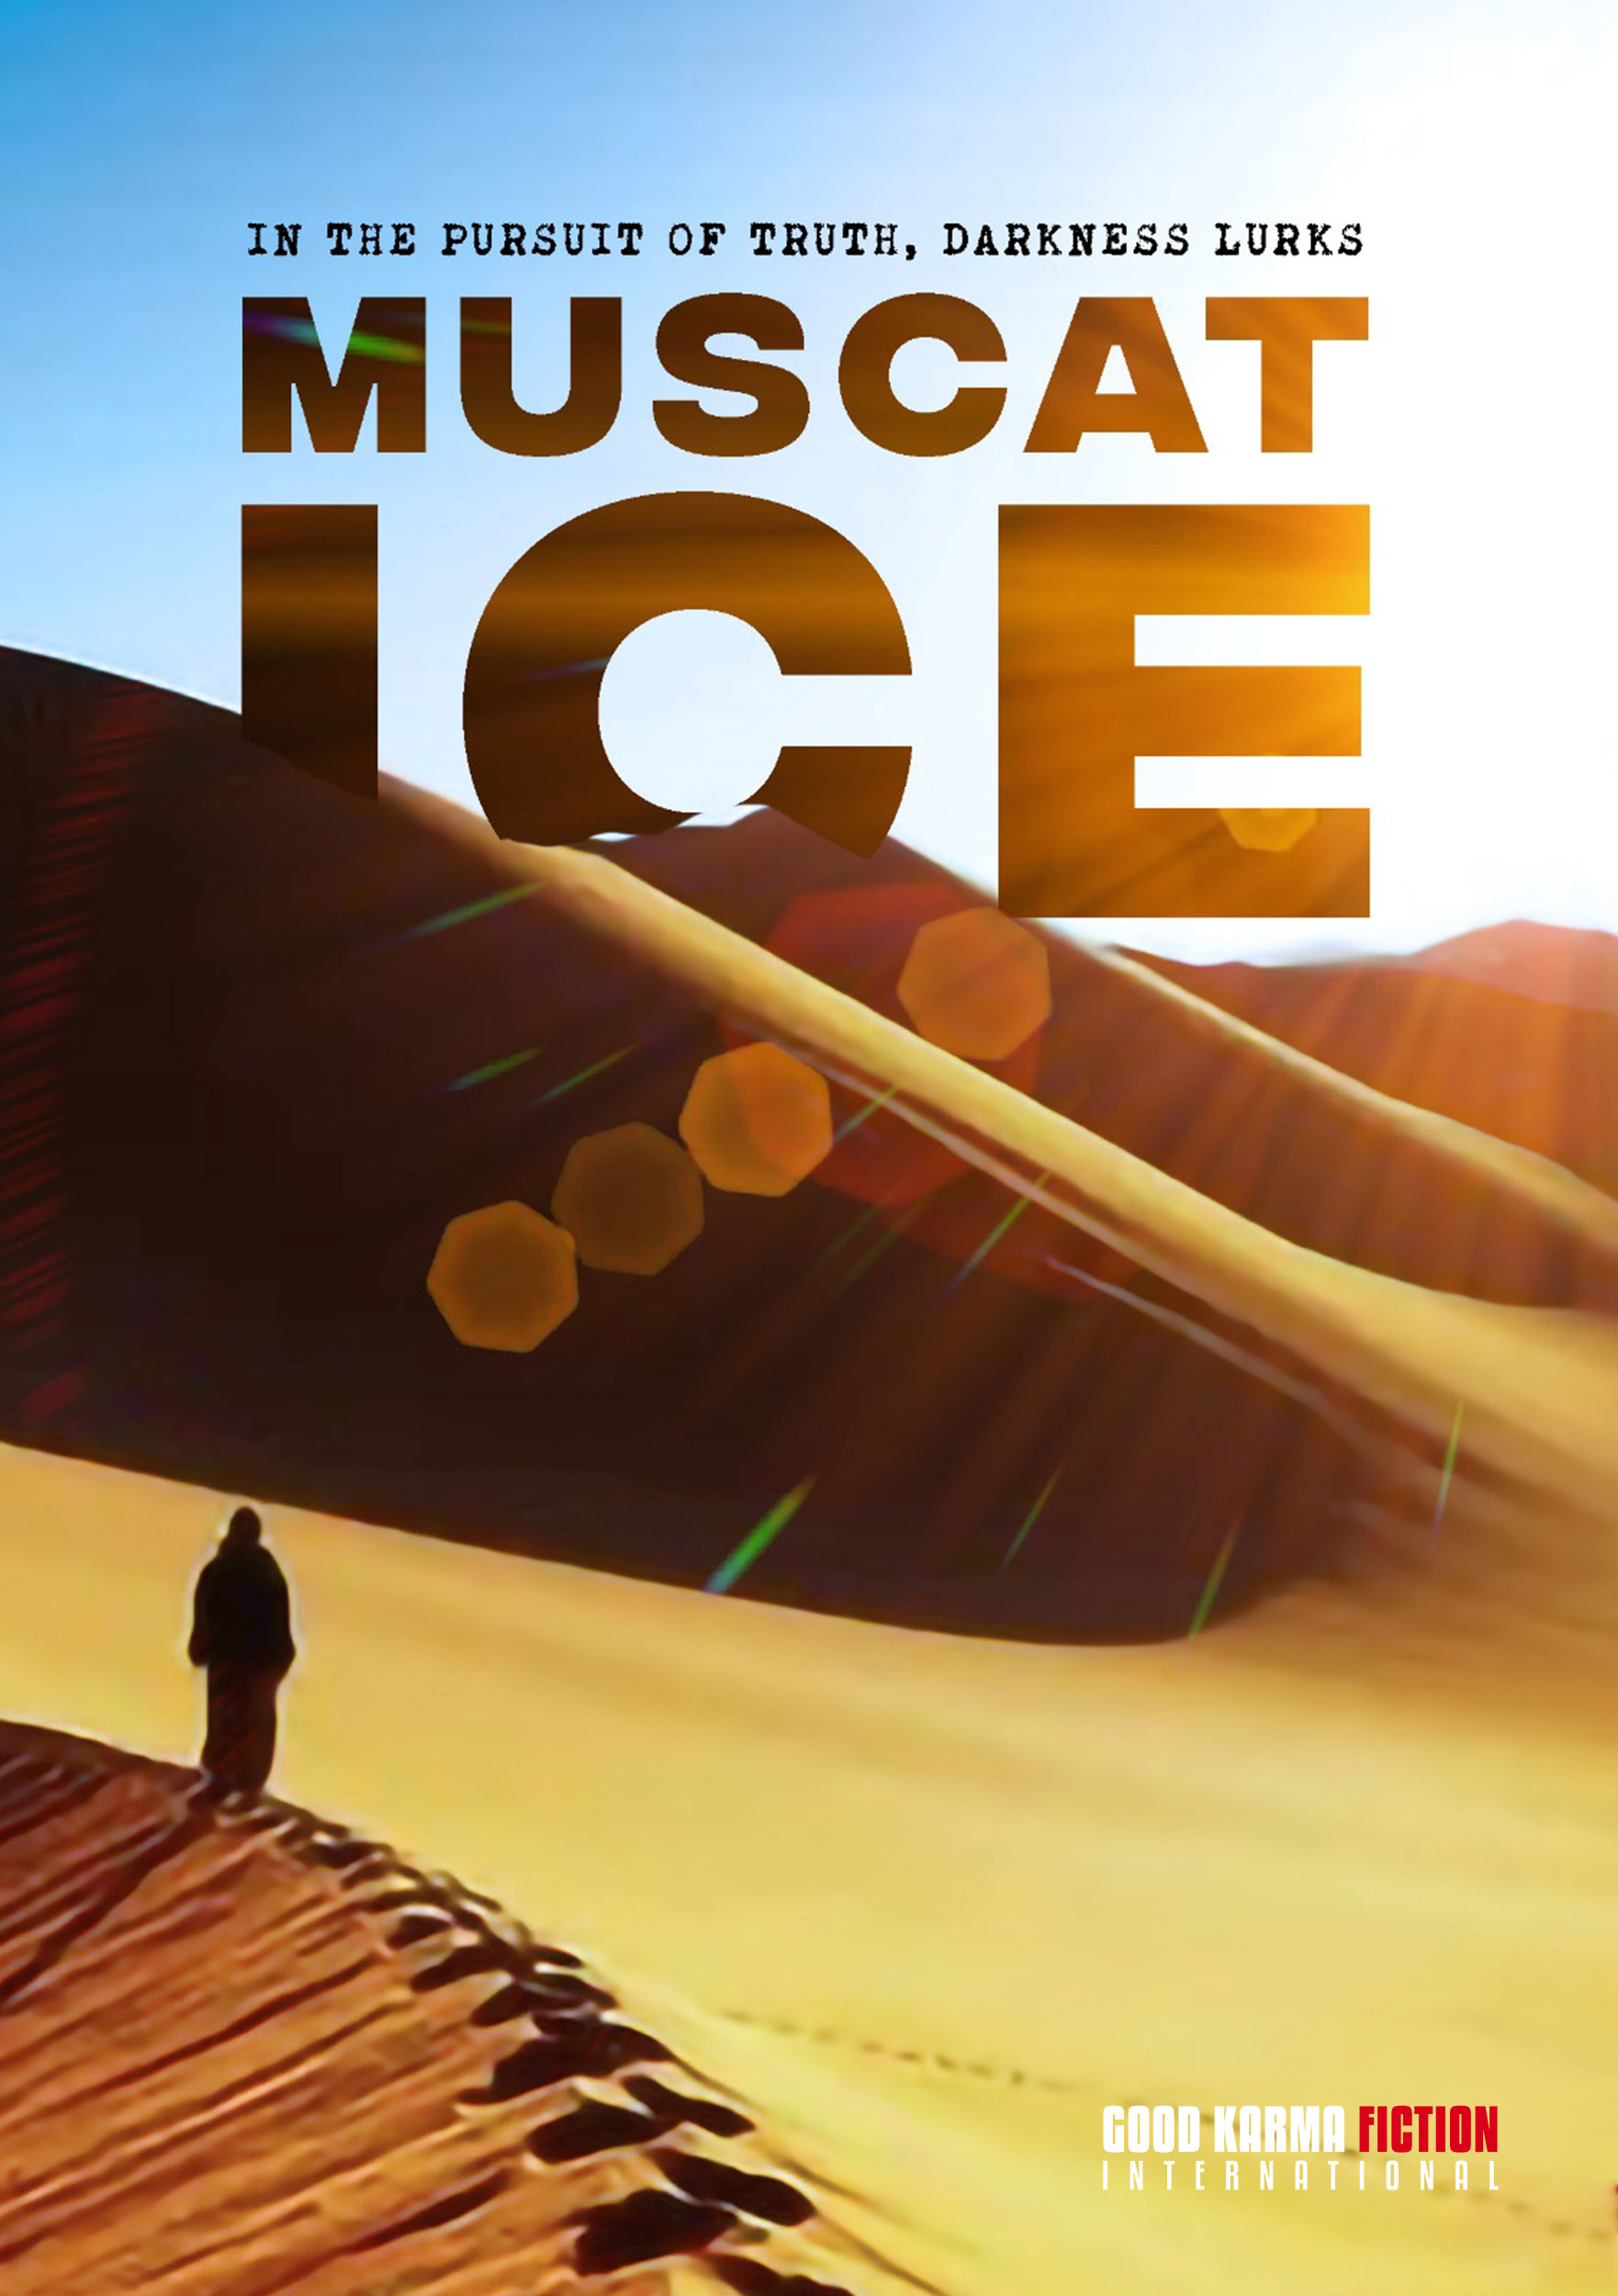 <i  id="iconinf1" class="fas fa-info" aria-hidden="true"></i><br> <h3>MUSCAT ICE</h3><br><p>A young woman, her fiancée tragically deceased, circumstances mysterious. <br>To find the answers she has to travel far, from the freezing winter streets of Berlin to the surreal shimmering deserts of Oman. <br><br><b>-A feature film in development, a crime thriller, an intense journey of subtle mysticism.-</b></p>